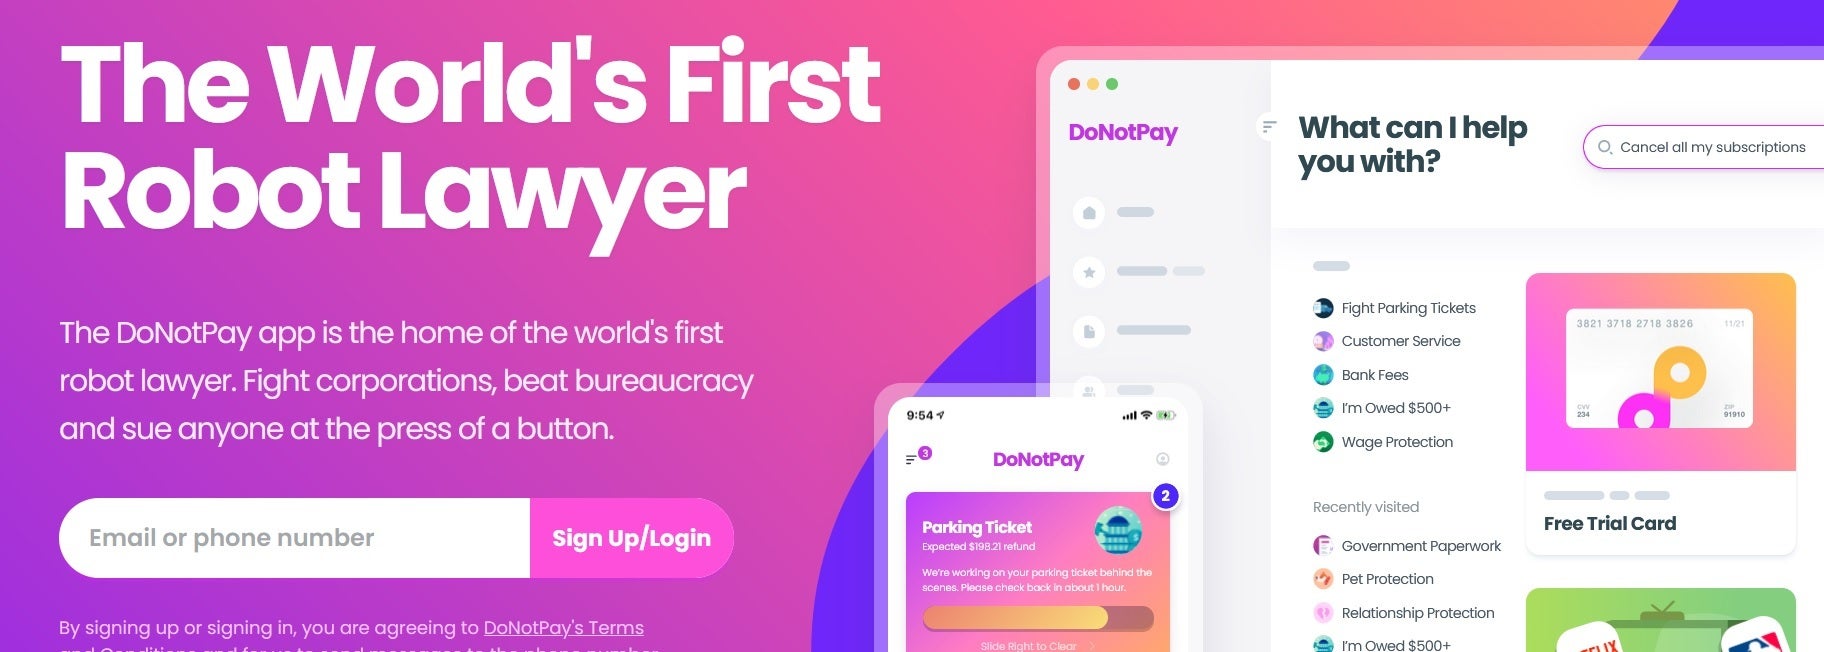 The DoNotPay website will help you handle certain tasks - AI-powered smartphone app will help defend a speeder in court next month